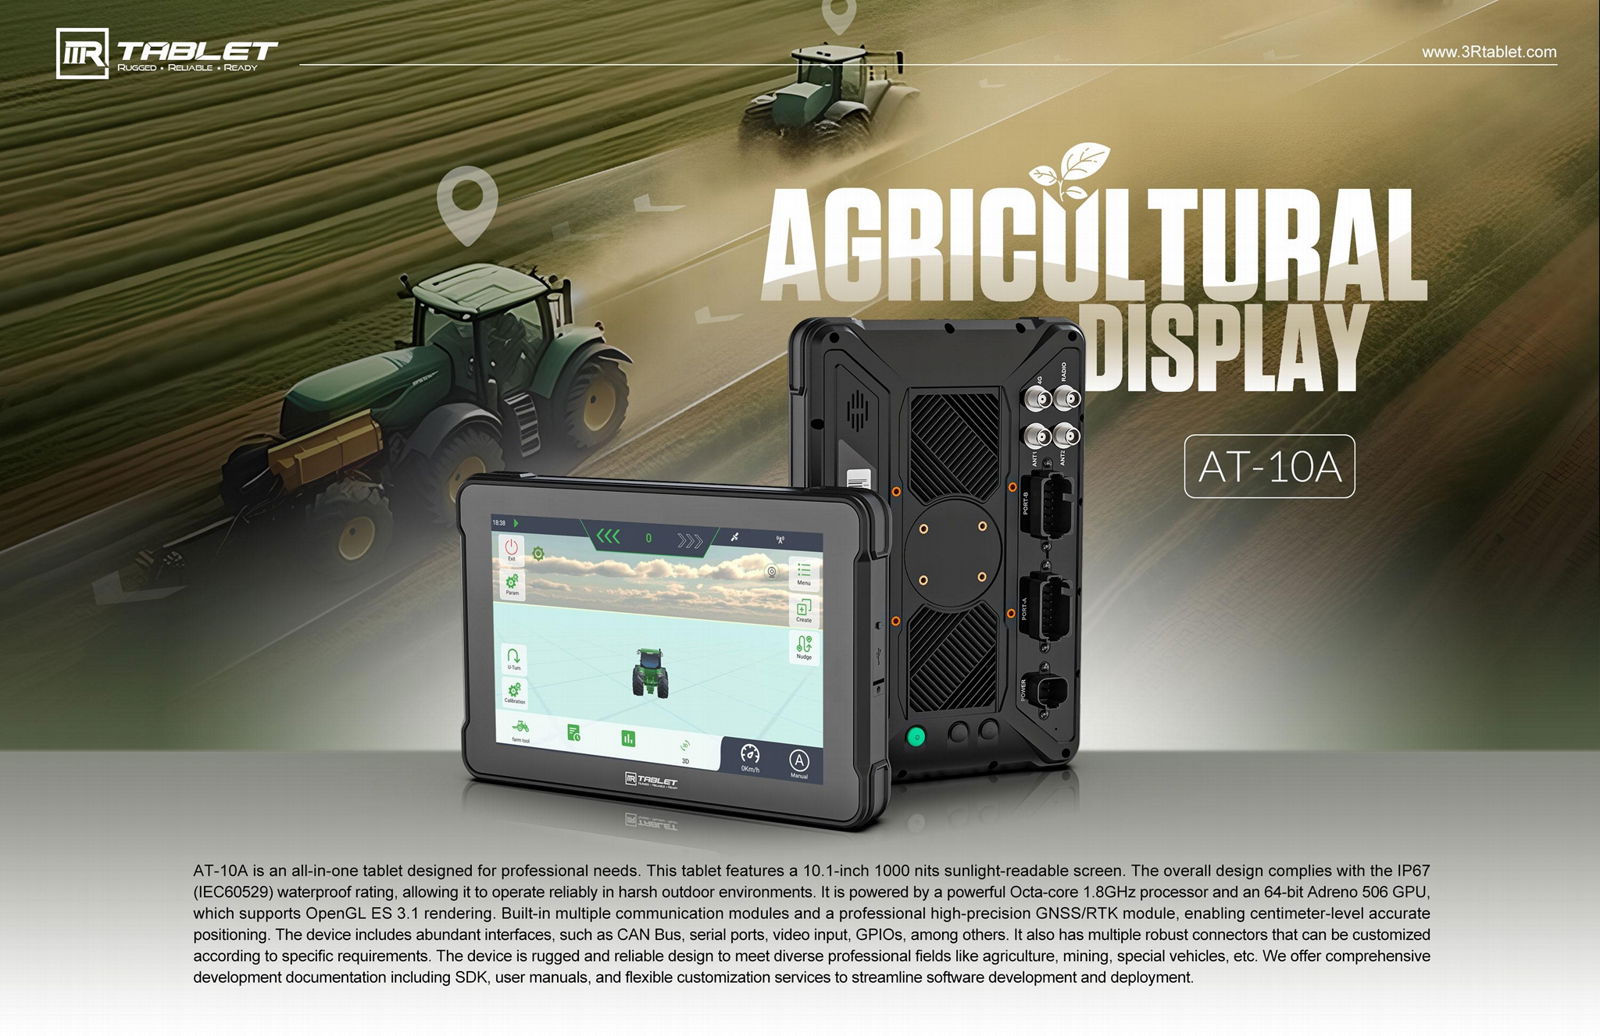 Built-in RTK Module Tablet 10 inch for Precision Agriculture AT-10A 3Rtablet 2